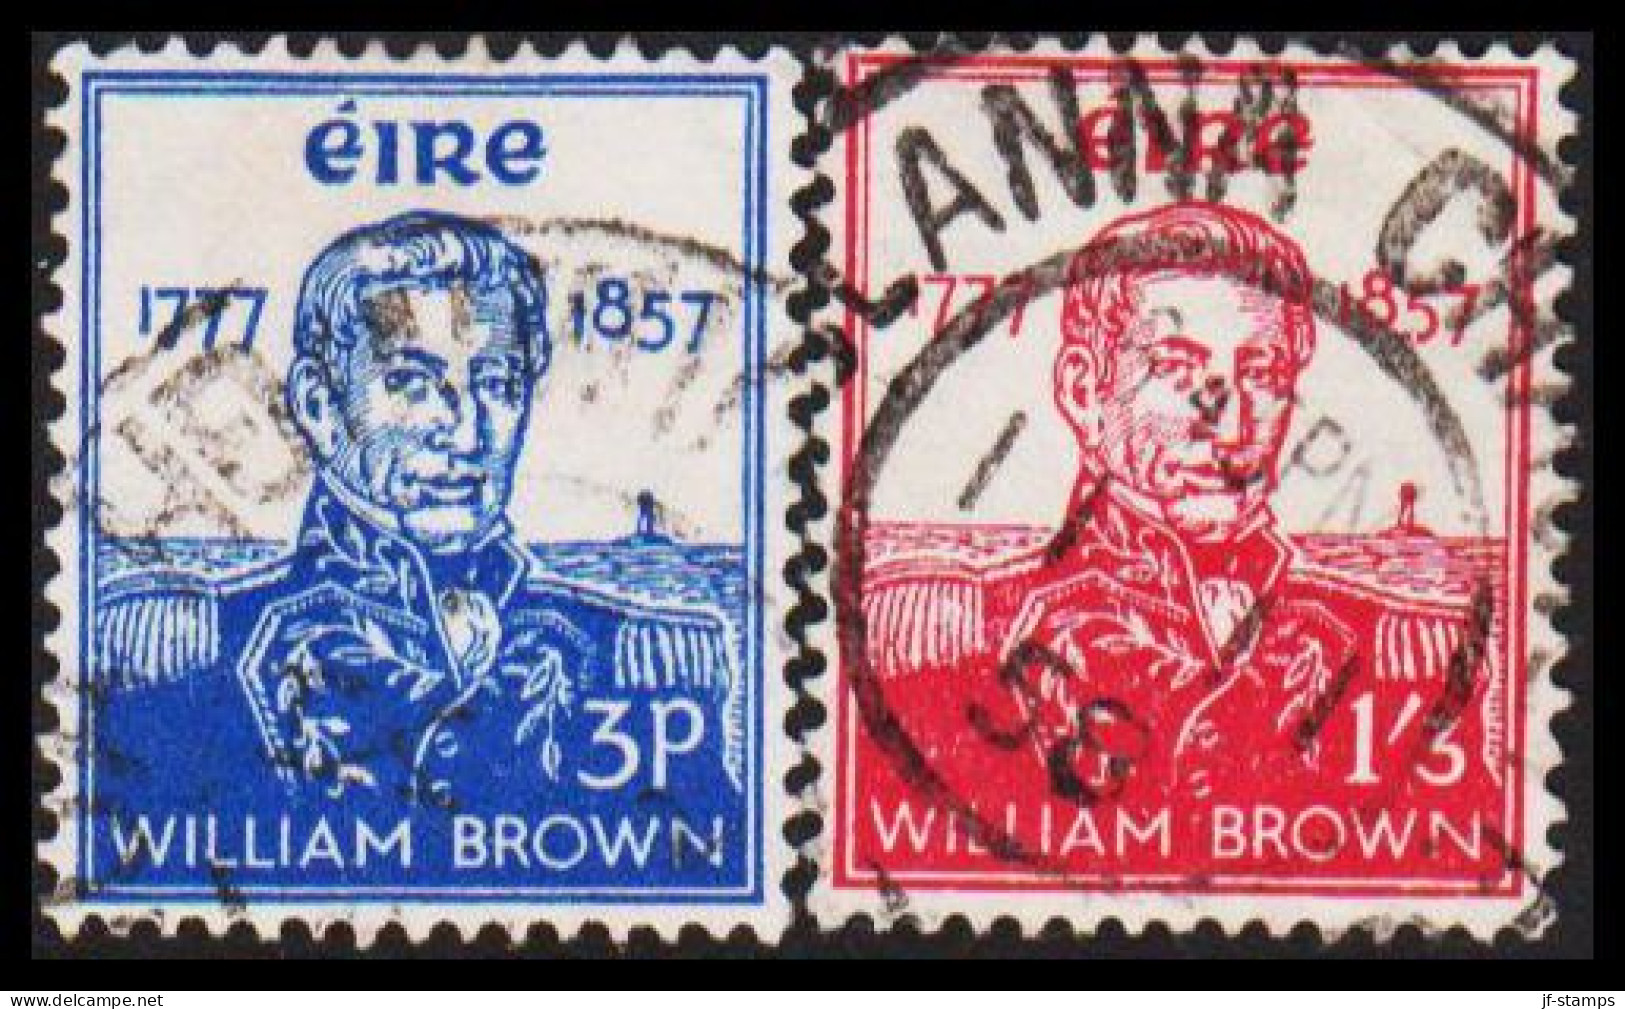 1957. EIRE. William Brown Complete Set Fine Cancels. (Michel 132-133) - JF544533 - Used Stamps